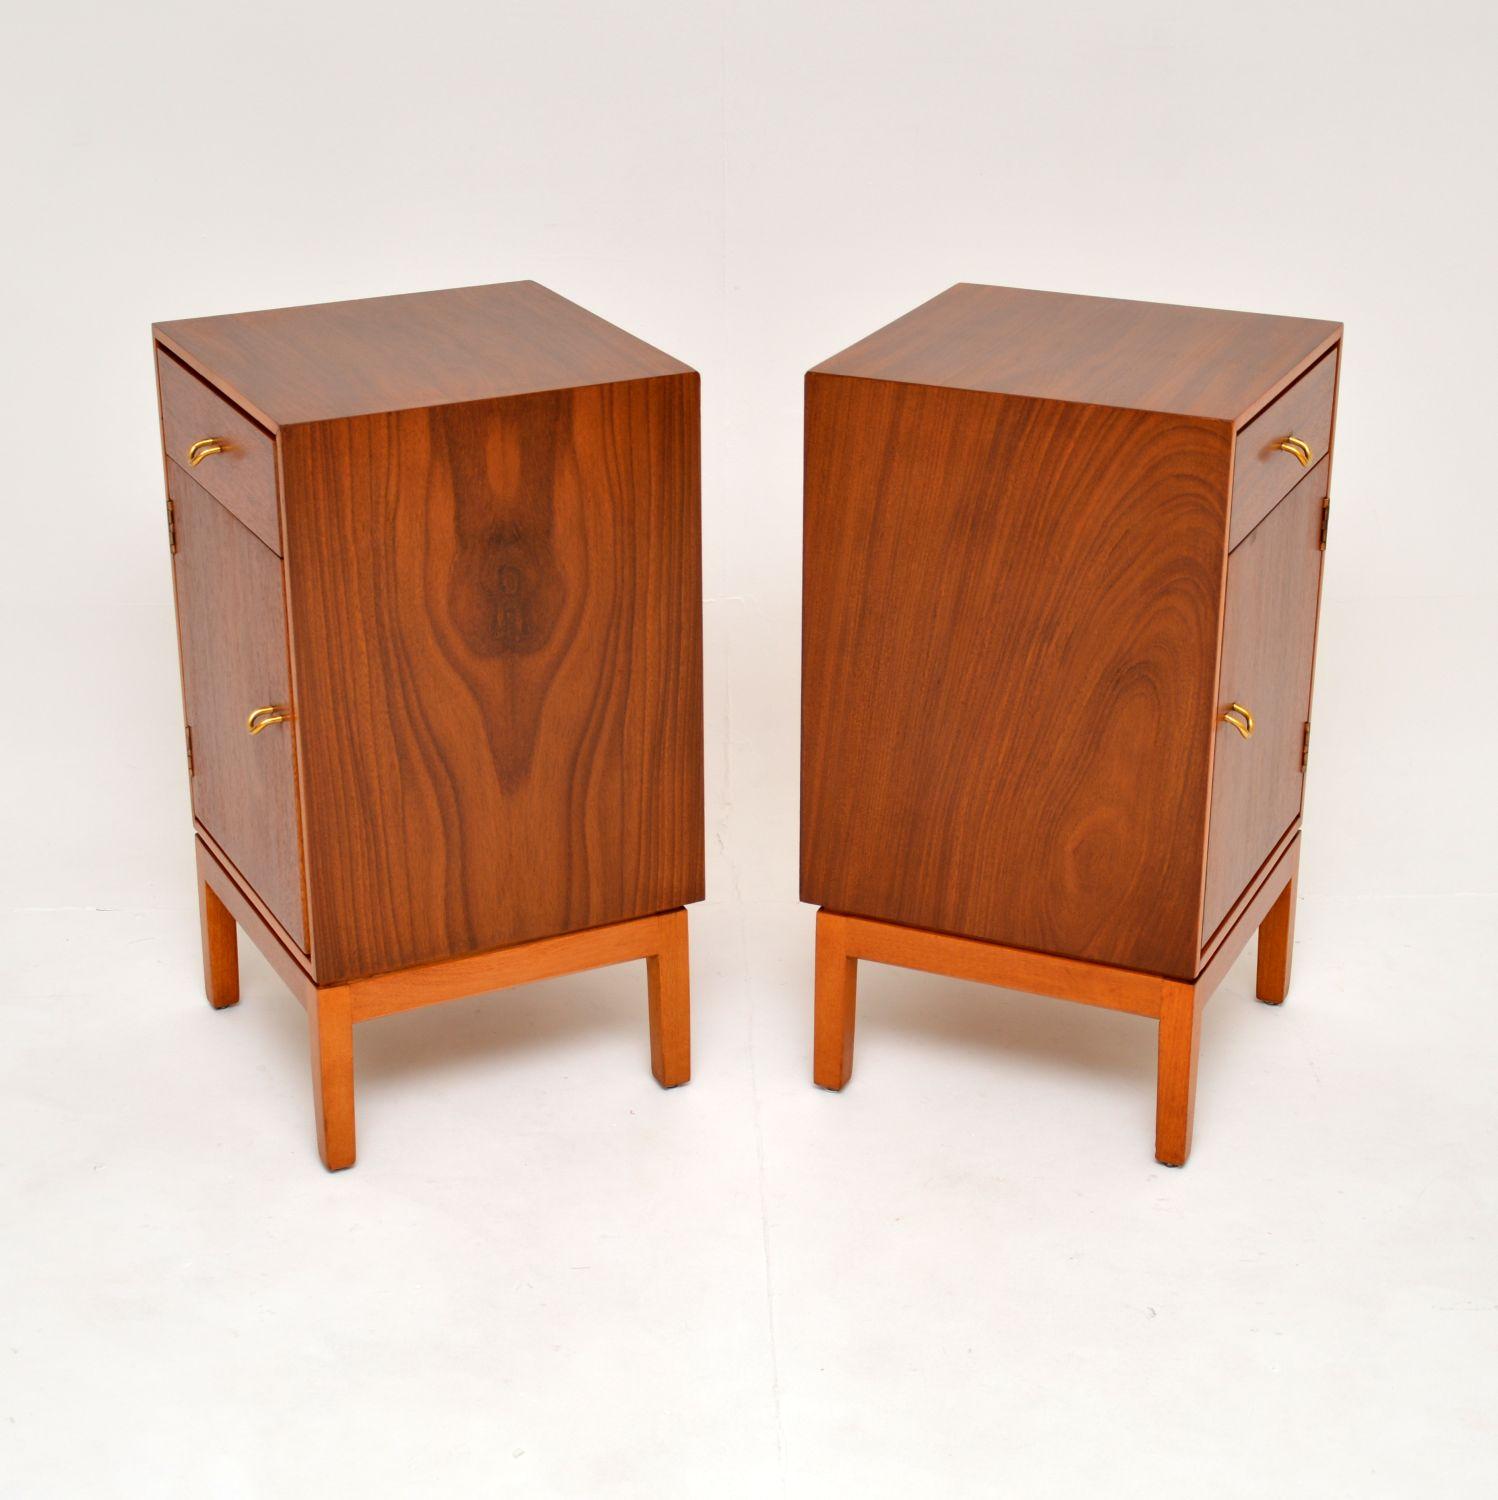 British 1950’s Pair of Vintage Walnut Bedside Cabinets by Stag